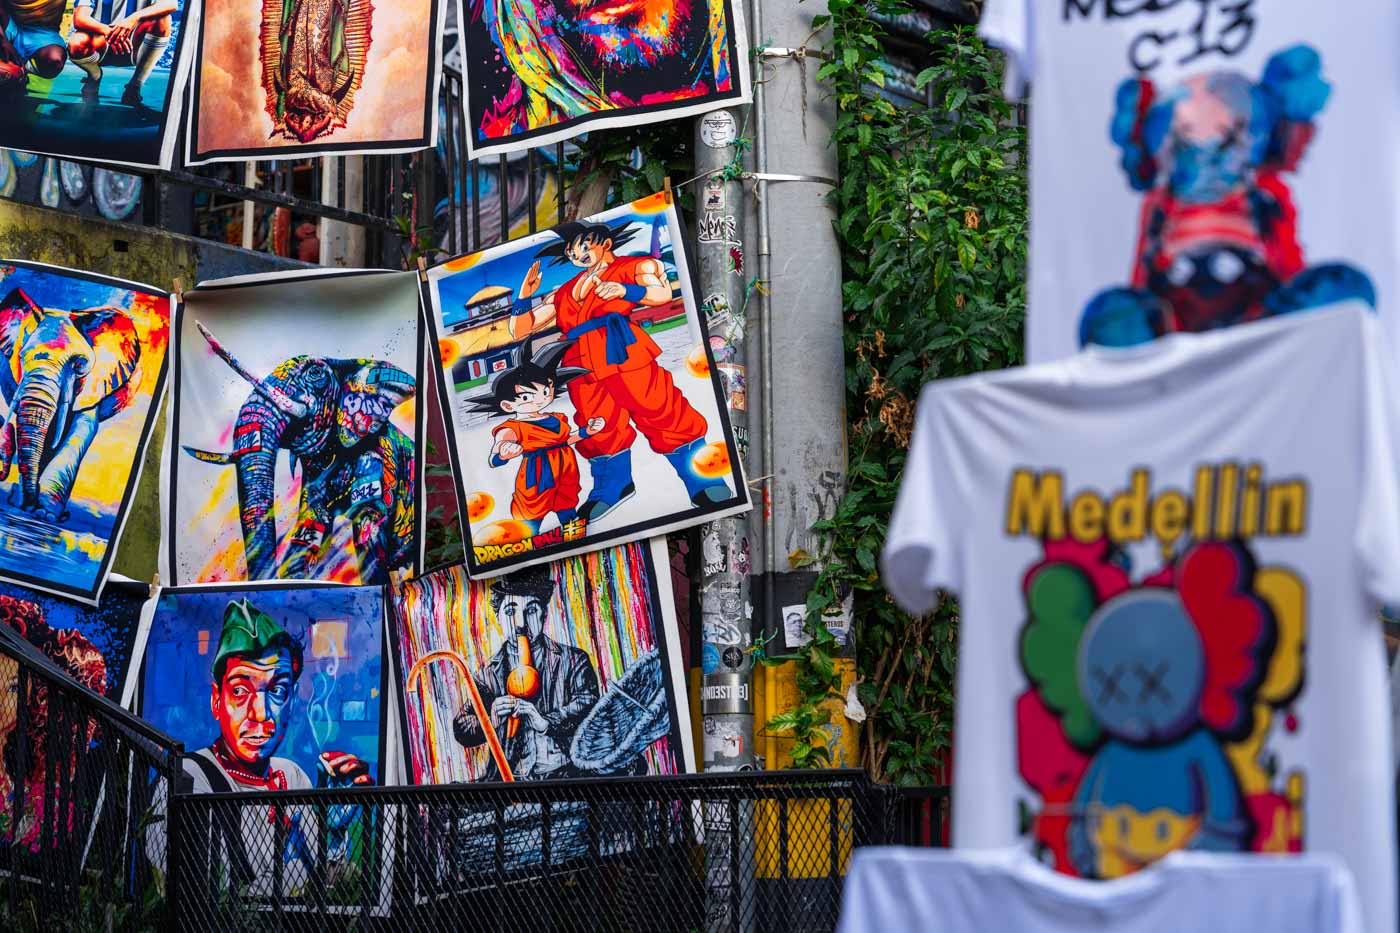 A range of distinct art products being sold in Comuna 13.